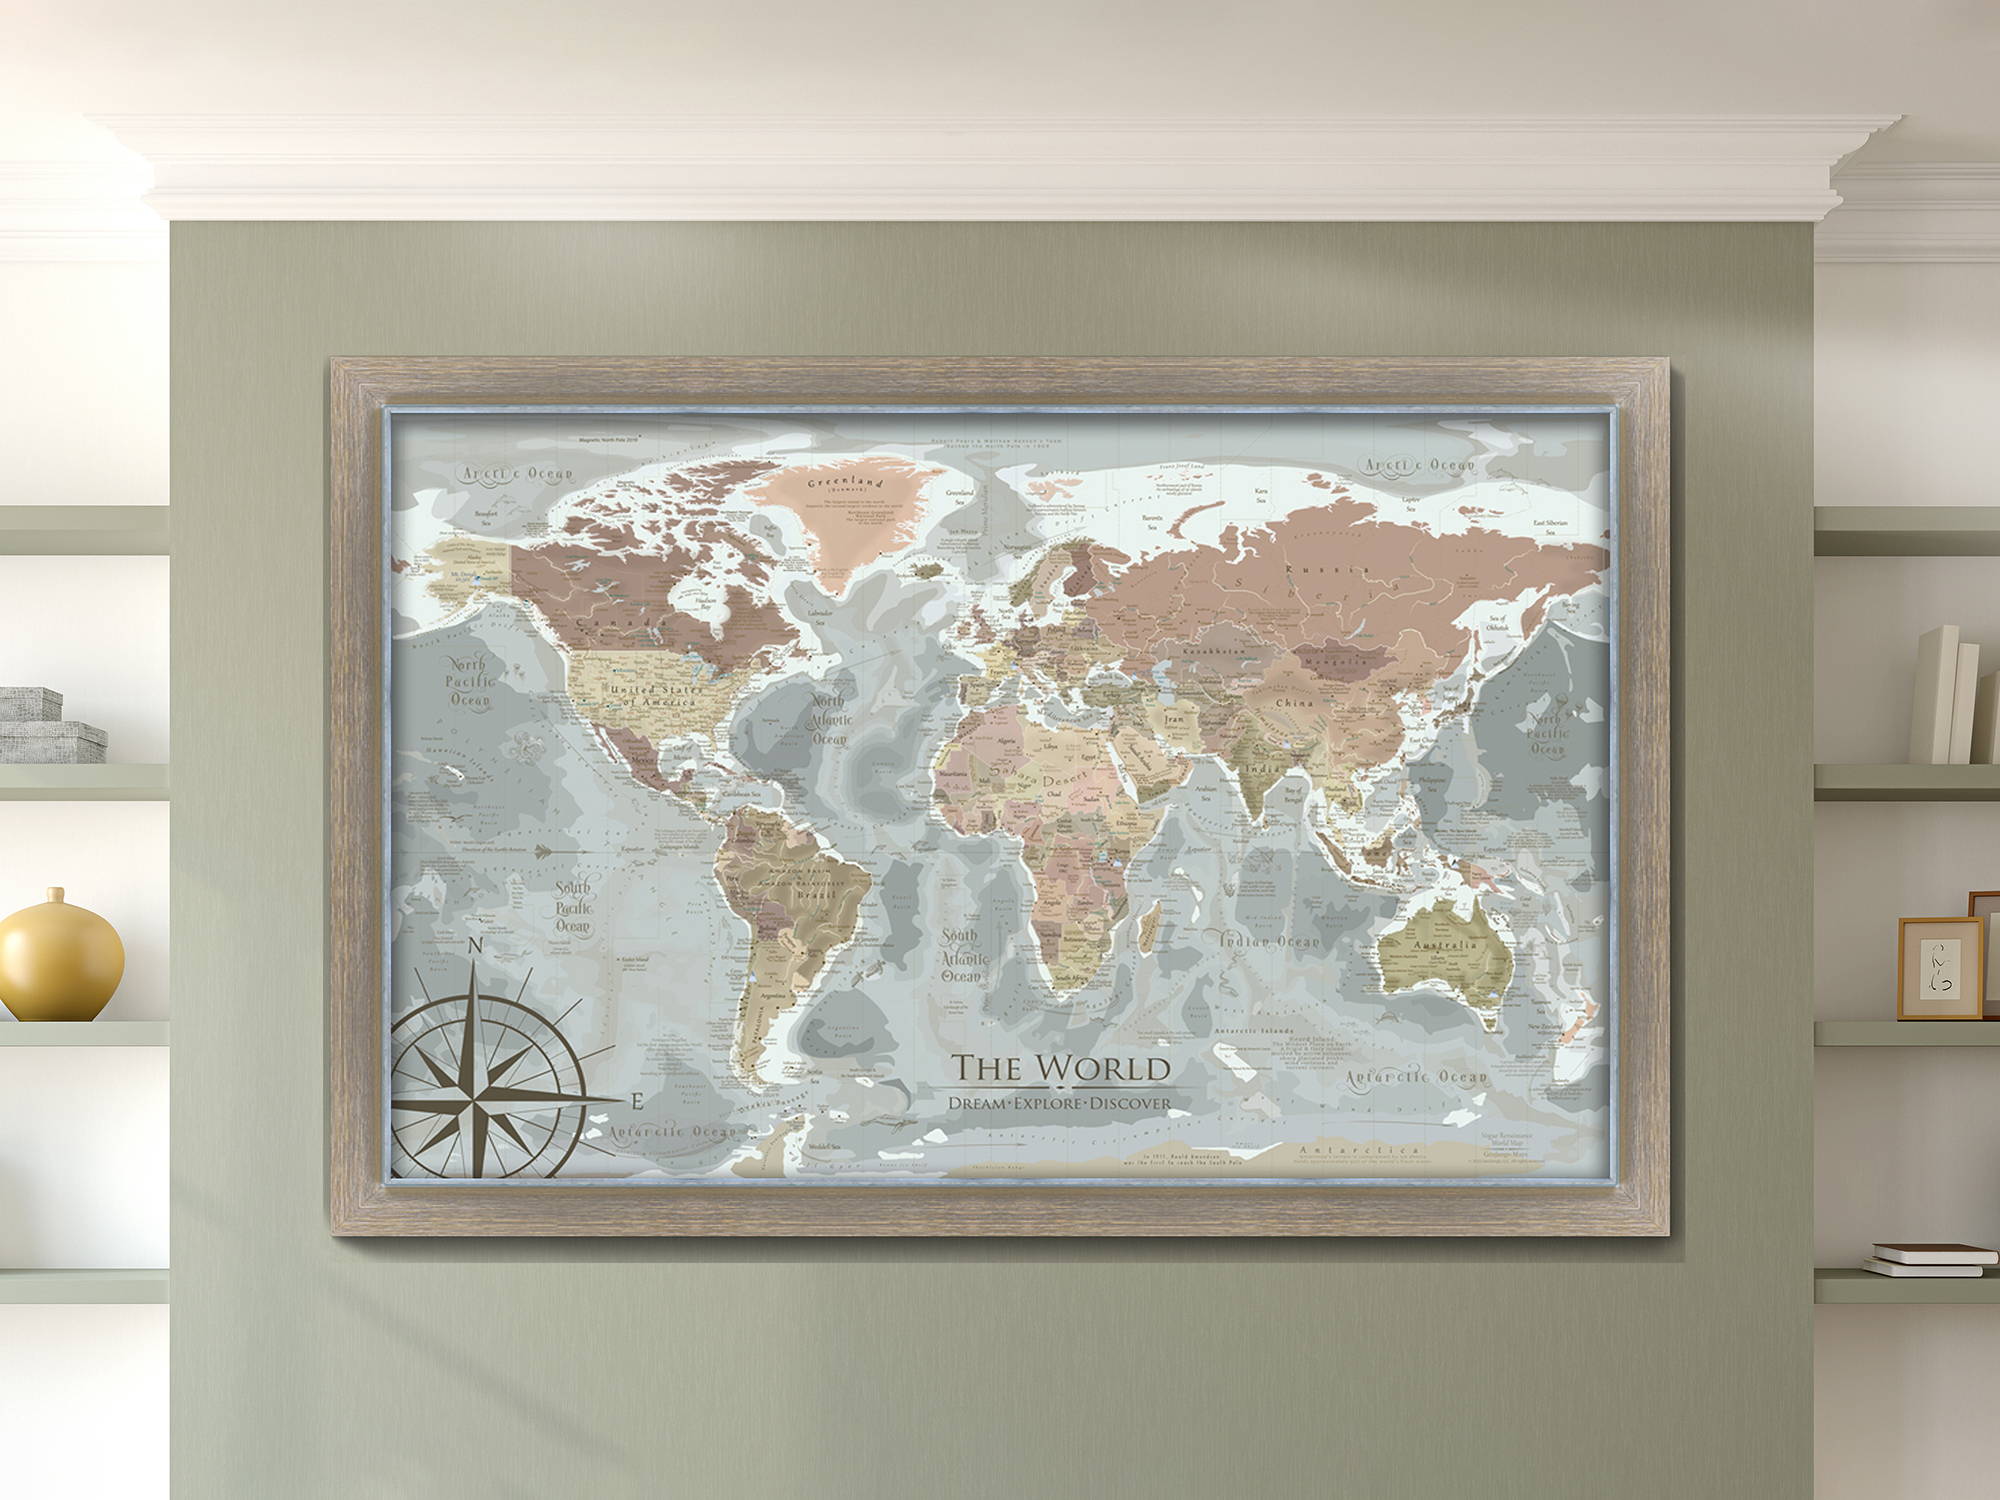 High-quality framed world map for pinning travels